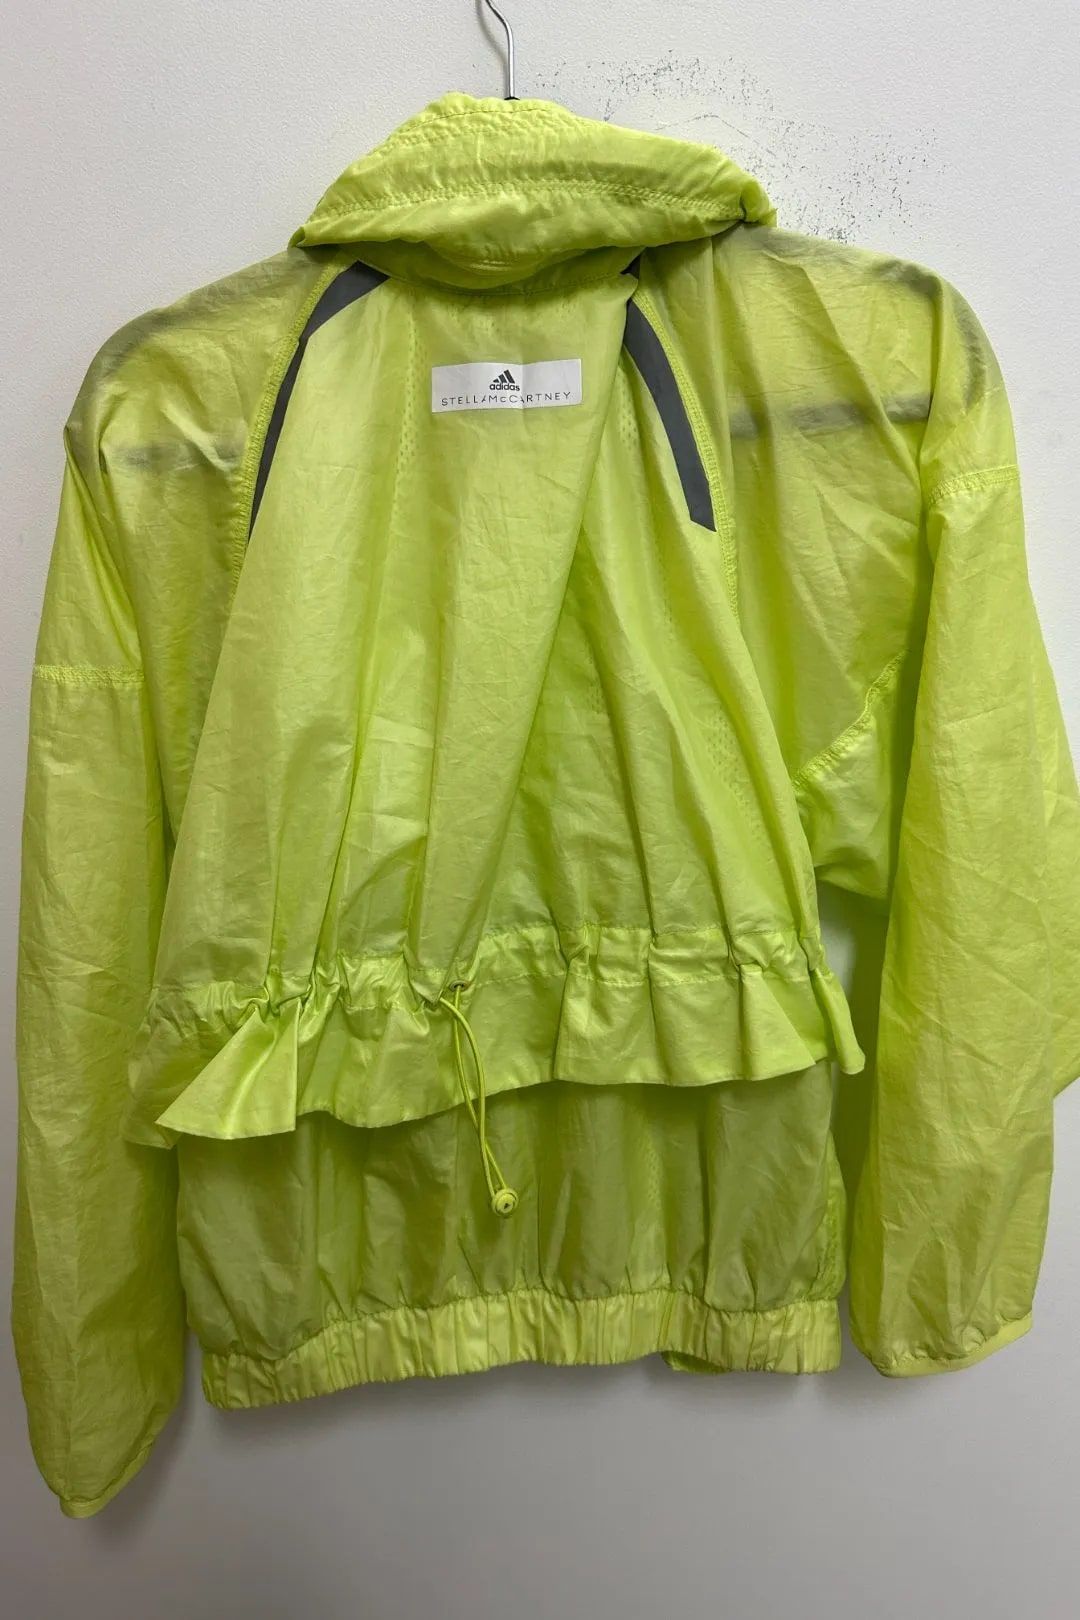 Neon Green Running Sports Jacket by Adidas by Stella McCartney, perfect for athleisure wear